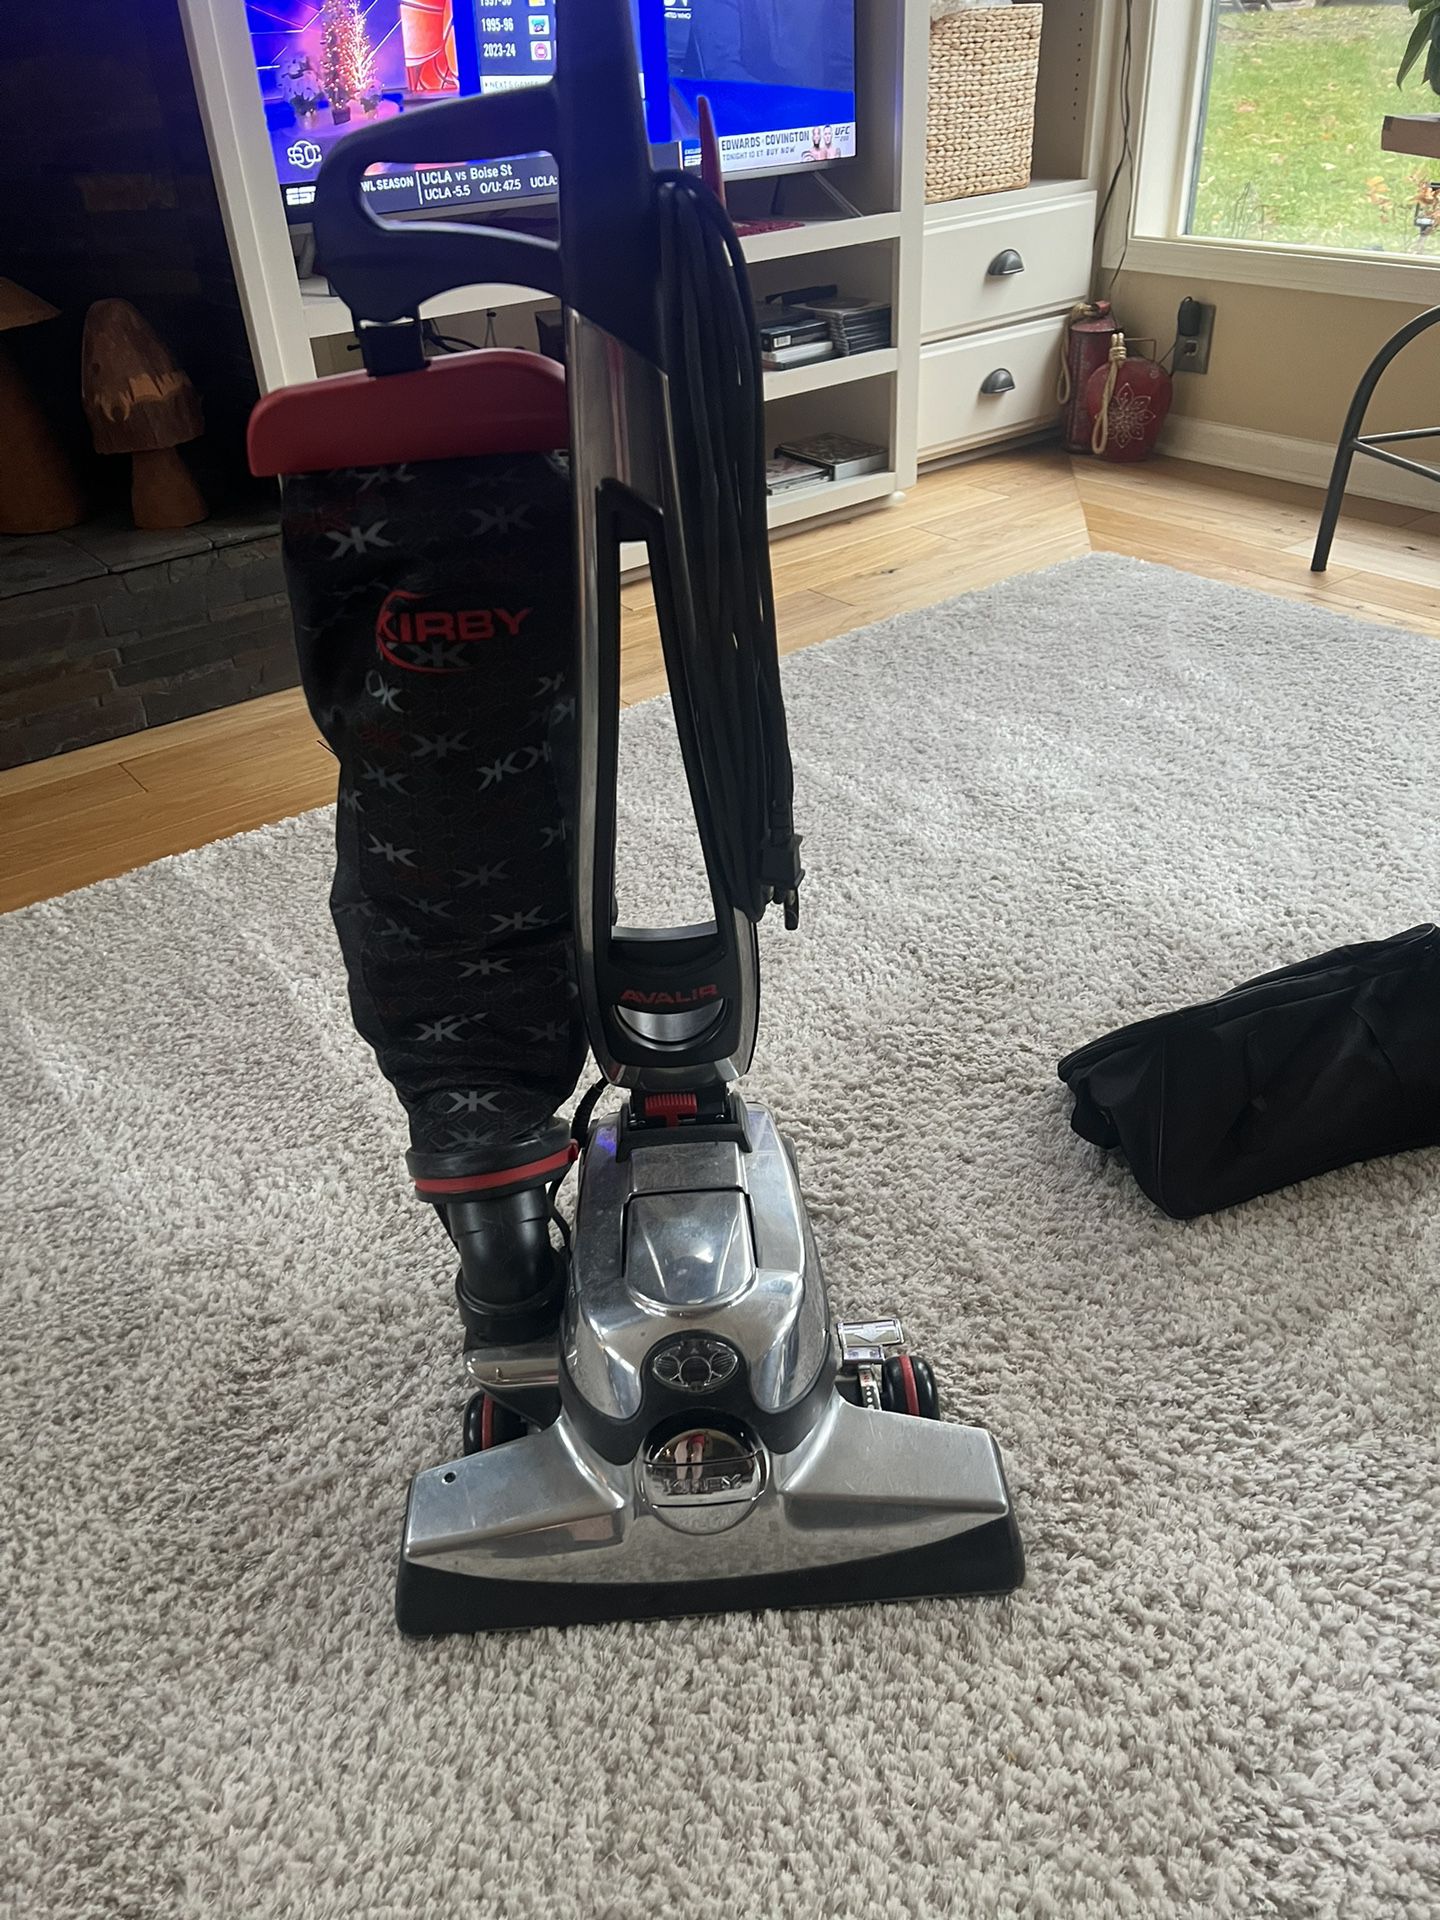 Kirby Vacuum W/ All Attachments Used 2 Times OBO!!! 